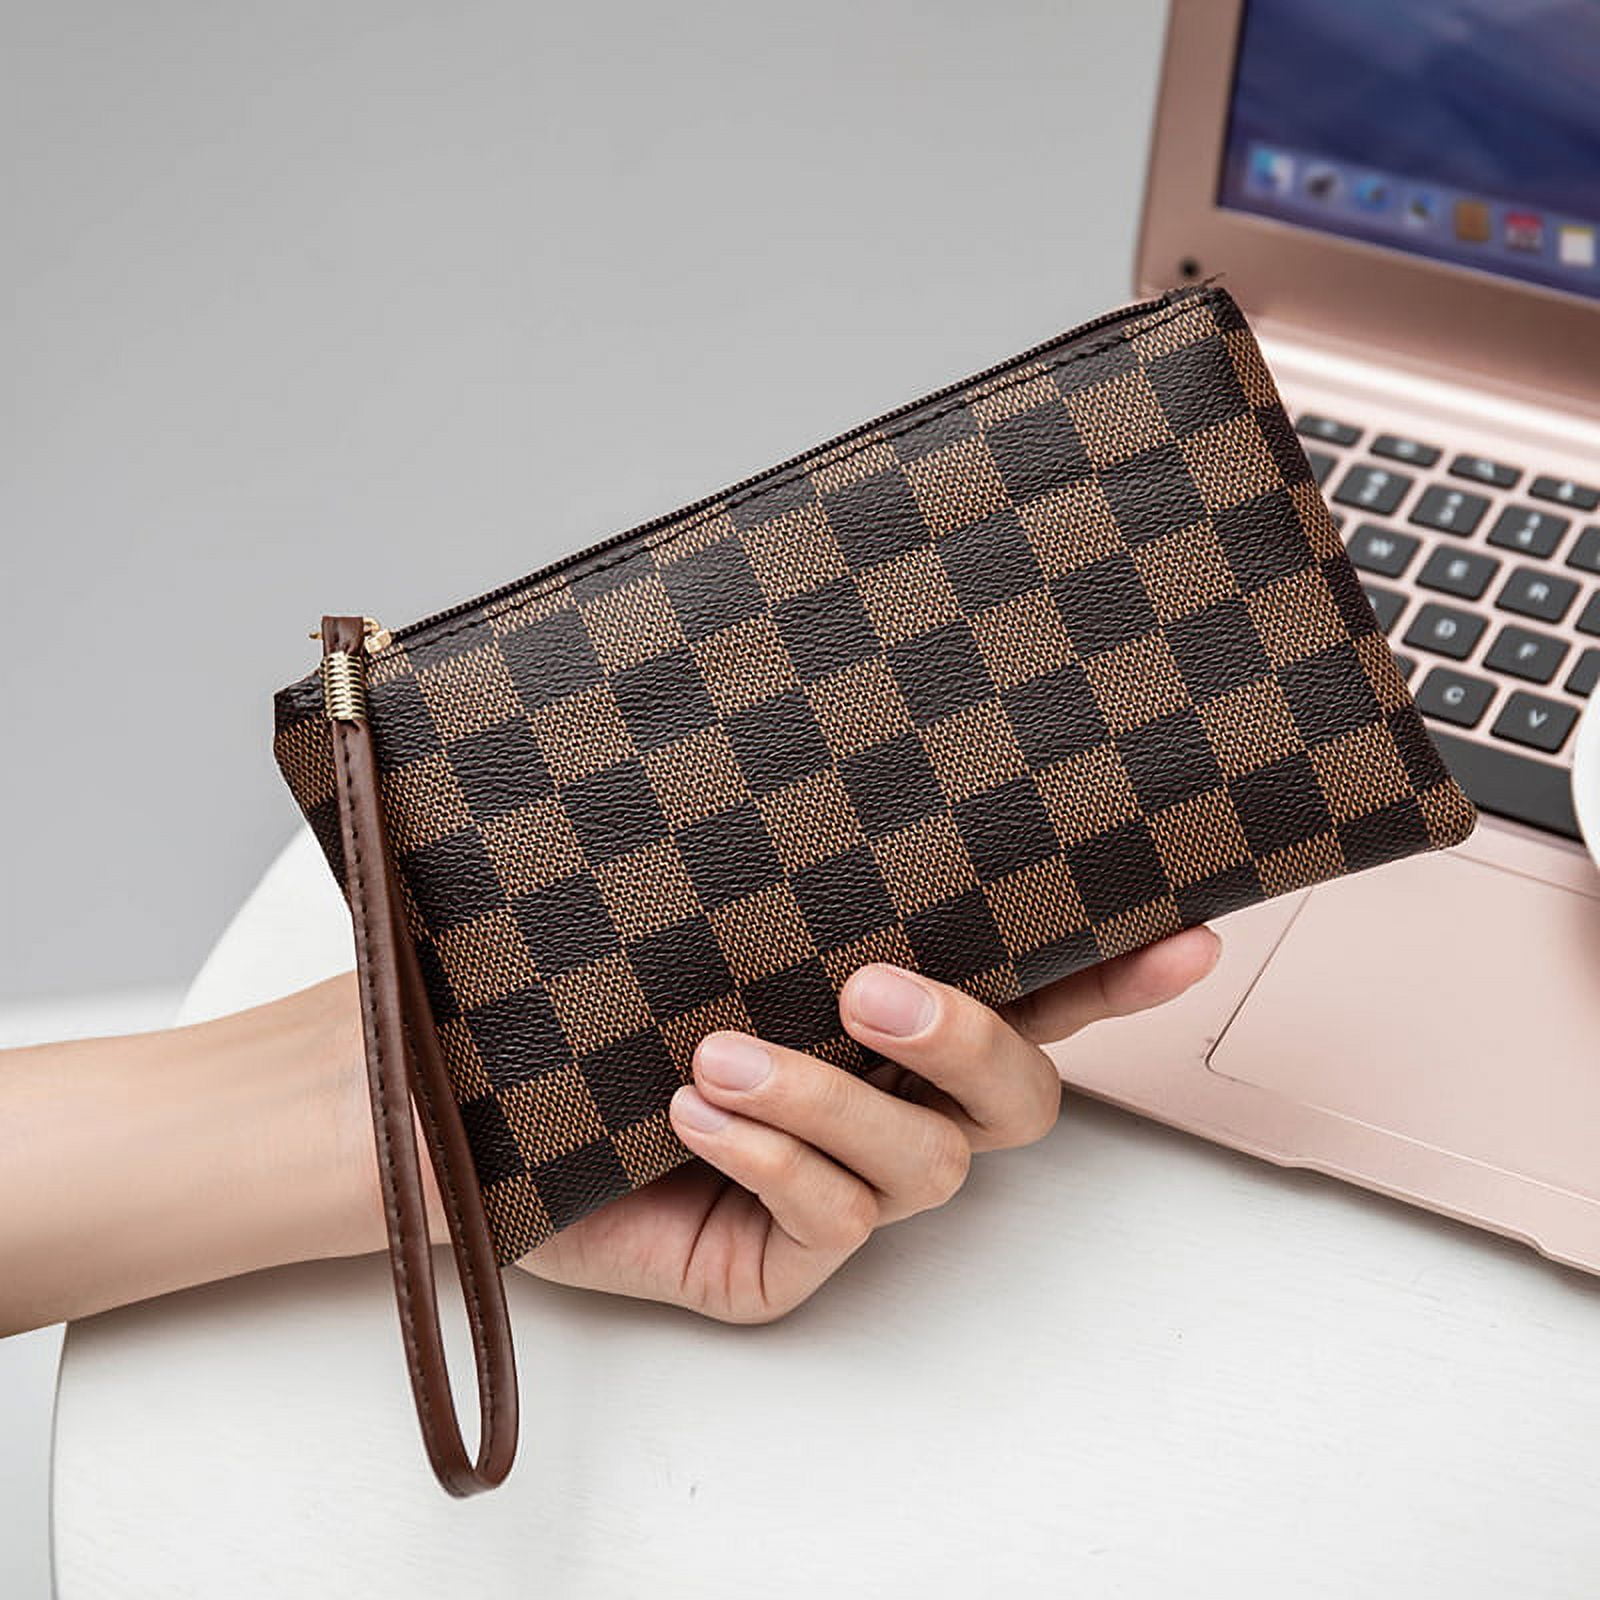 Checkered Travel Makeup Bag, Vegan Leather Large Retro Cosmetic Pouch,  Toiletry Travel Bag for Women, Portable and Waterproof Brown Makeup Bag